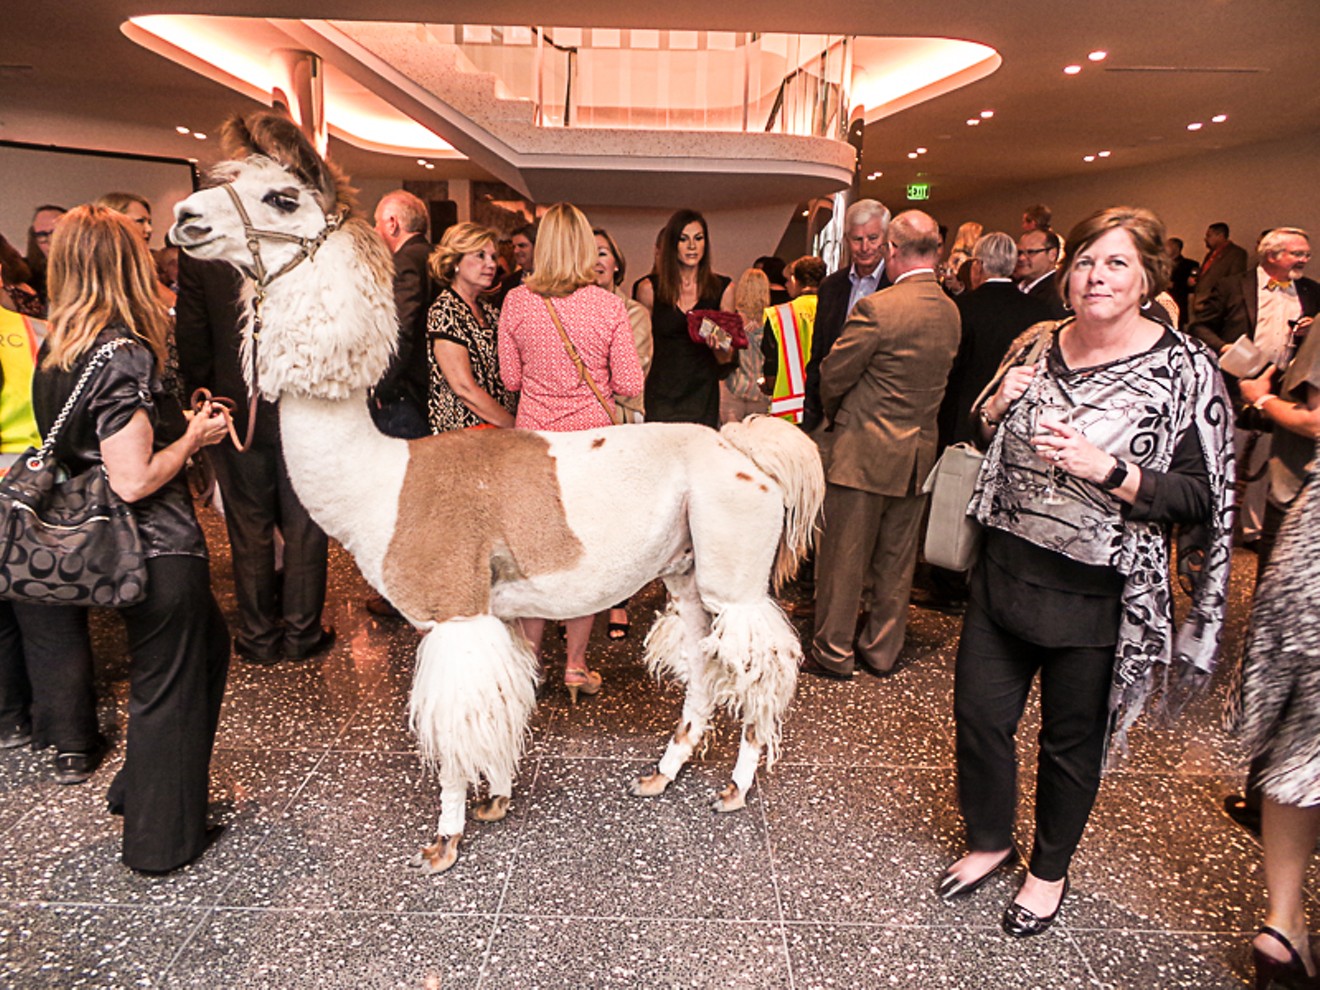 Among the 250 guests at the Statler Hotel Wednesday night was a llama, a nod to Conrad Hilton, the hotel's former owner,  who was a big fan of the animal.